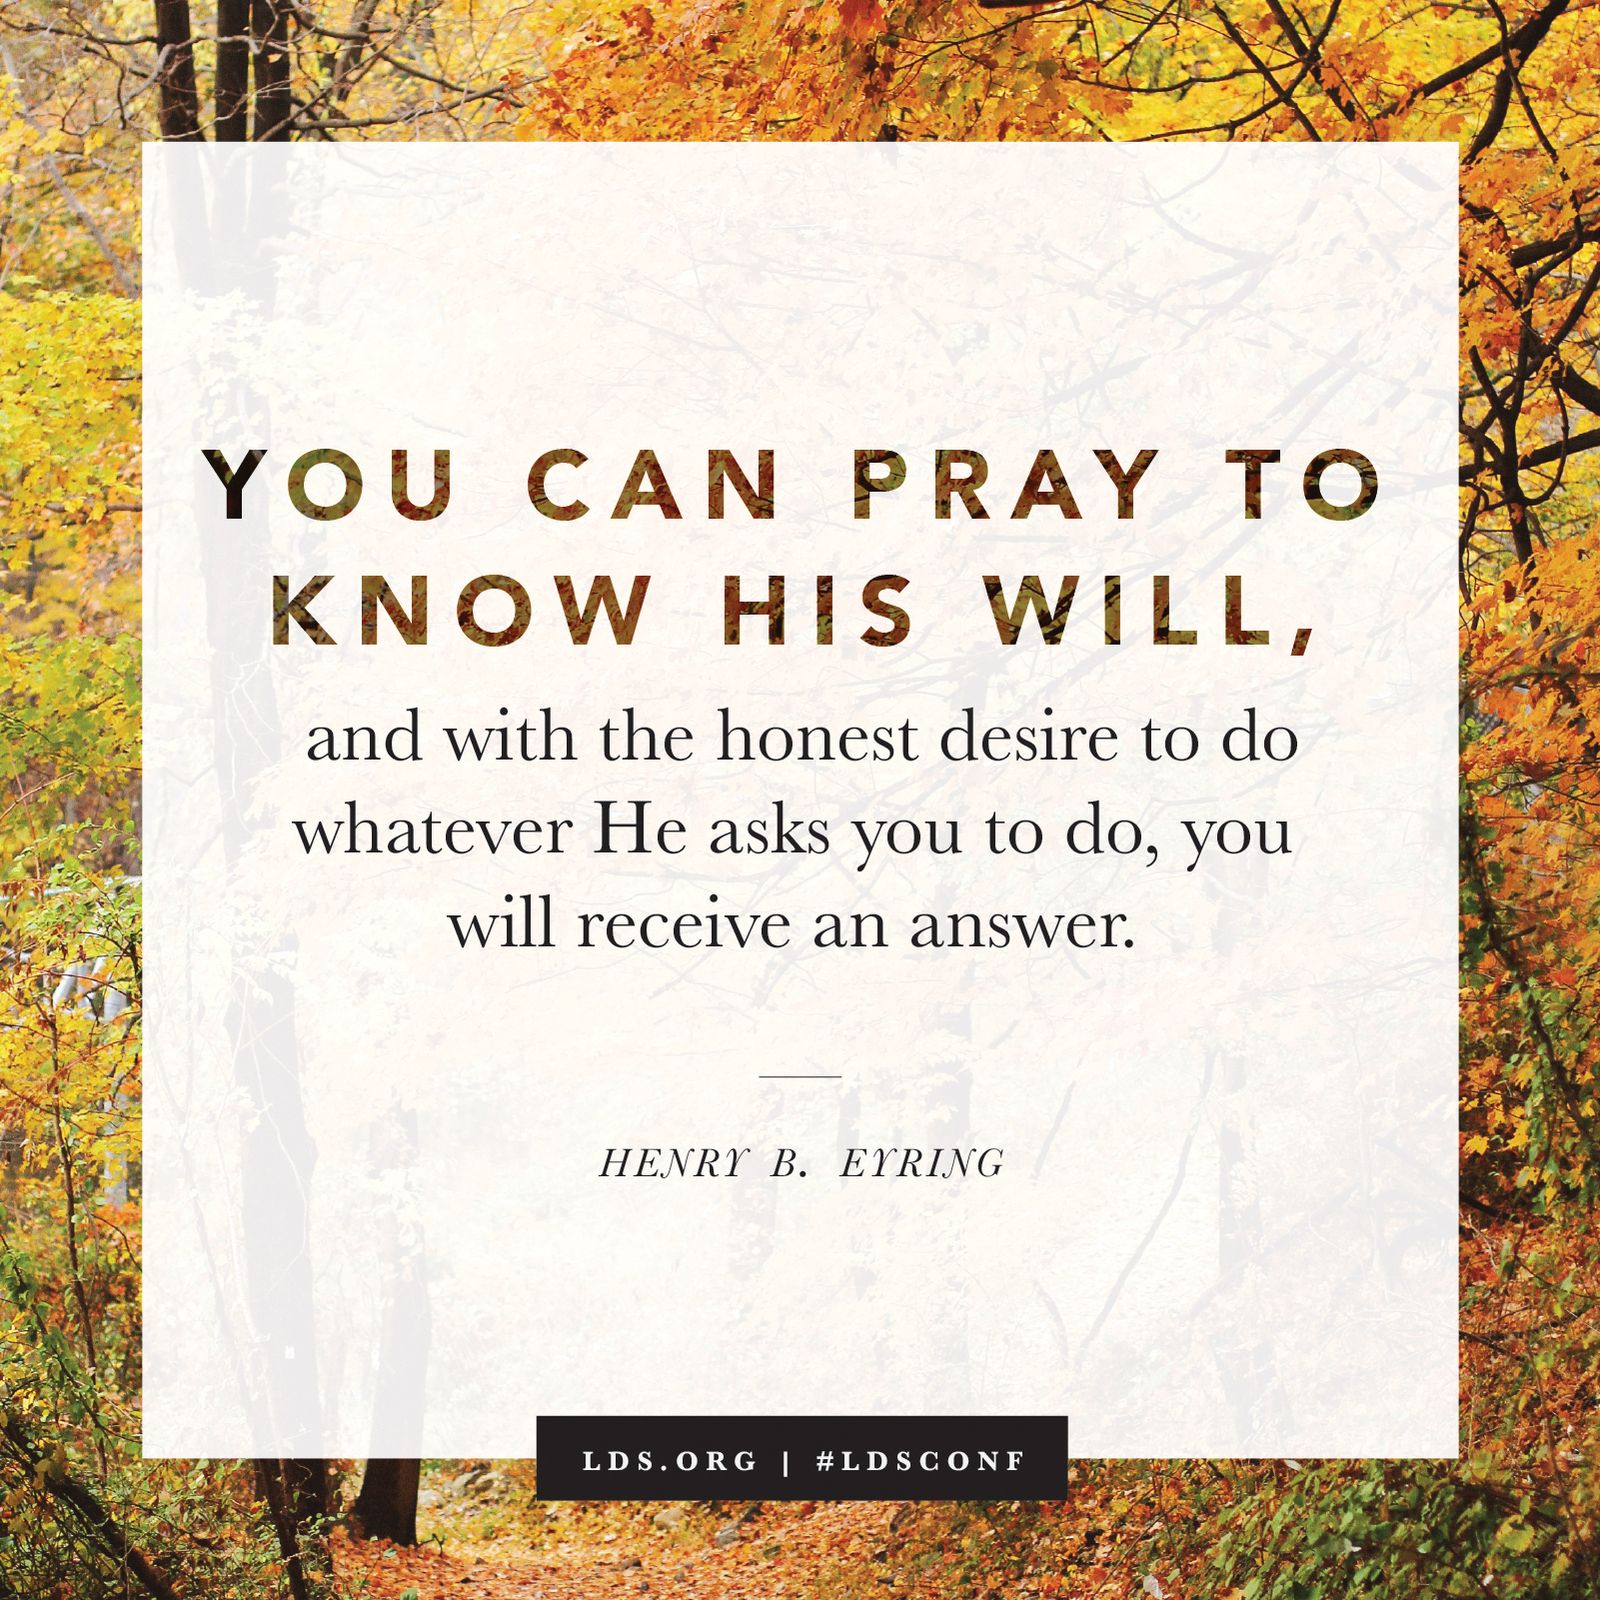 “You can pray to know His will, and with the honest desire to do whatever He asks you to do, you will receive an answer.” —President Henry B. Eyring, “You Are Not Alone in the Work”